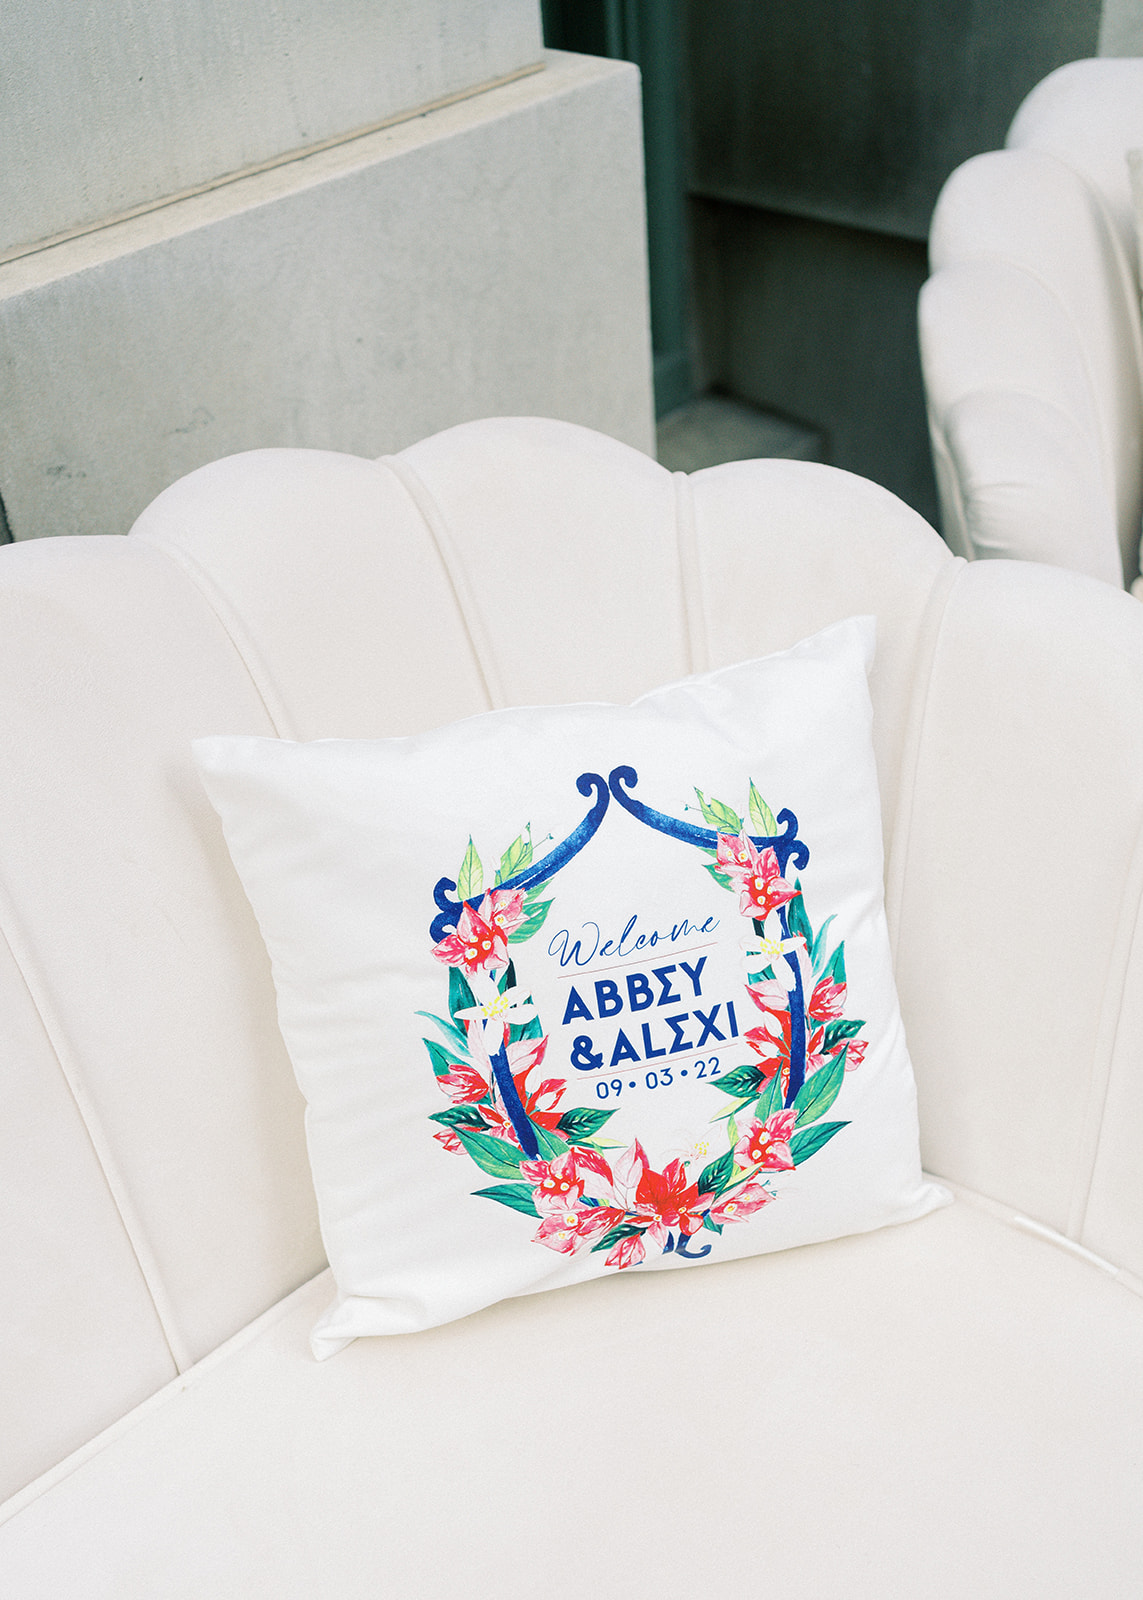 PERSONALIZED THROW PILLOW AT LARZ ANDERSON WEDDING RECEPTION